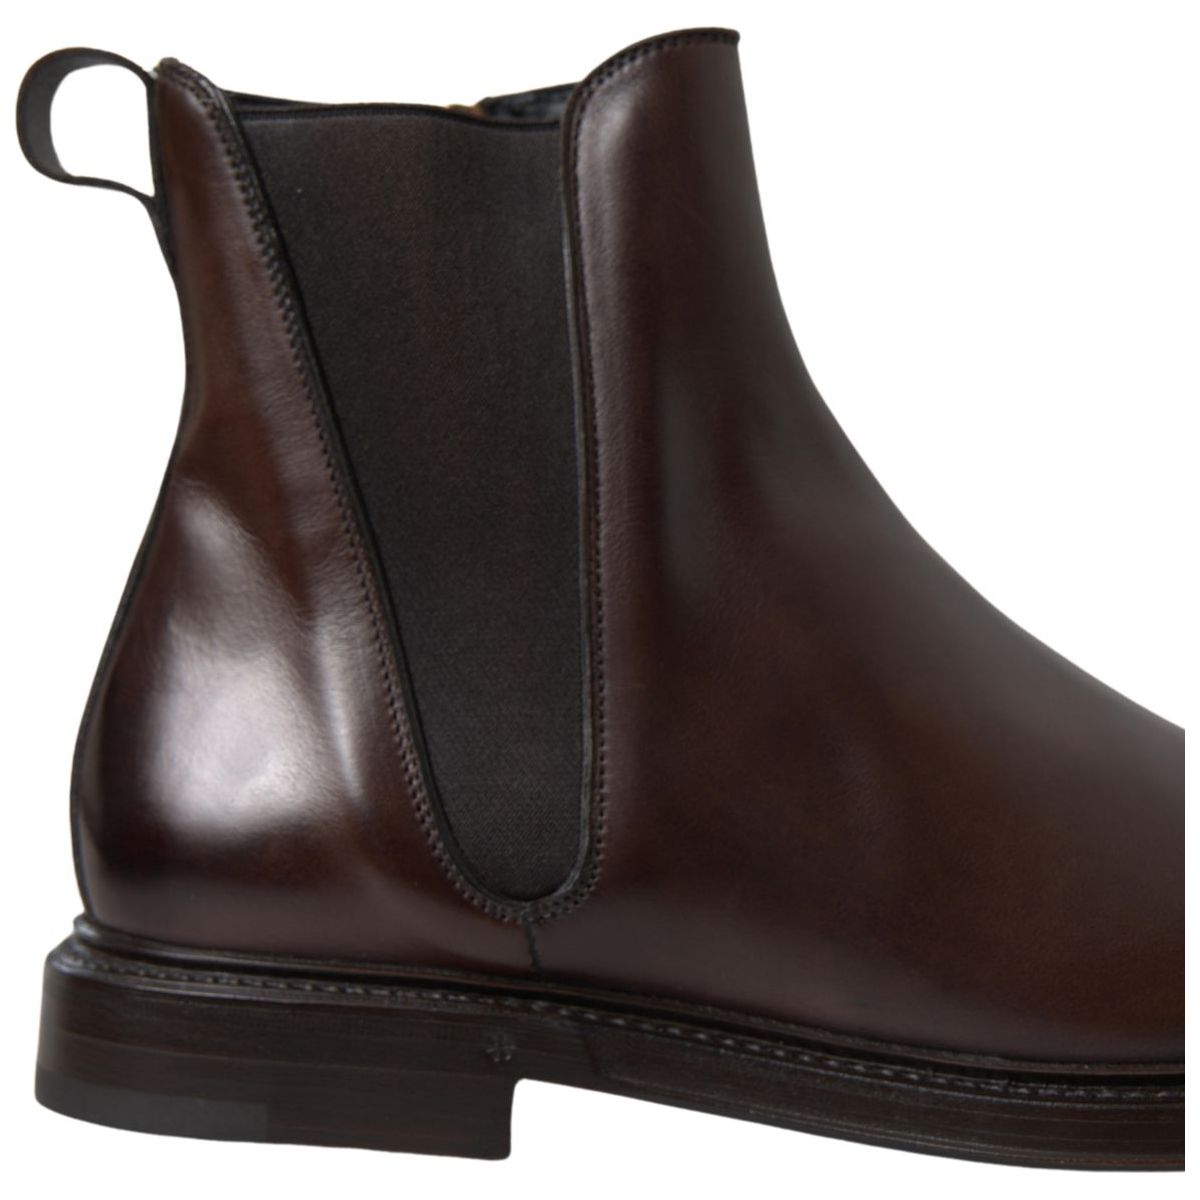 Dolce & Gabbana Elegant Leather Chelsea Boots brown-leather-chelsea-mens-boots-shoes 465A8390-c864bde9-f07.jpg